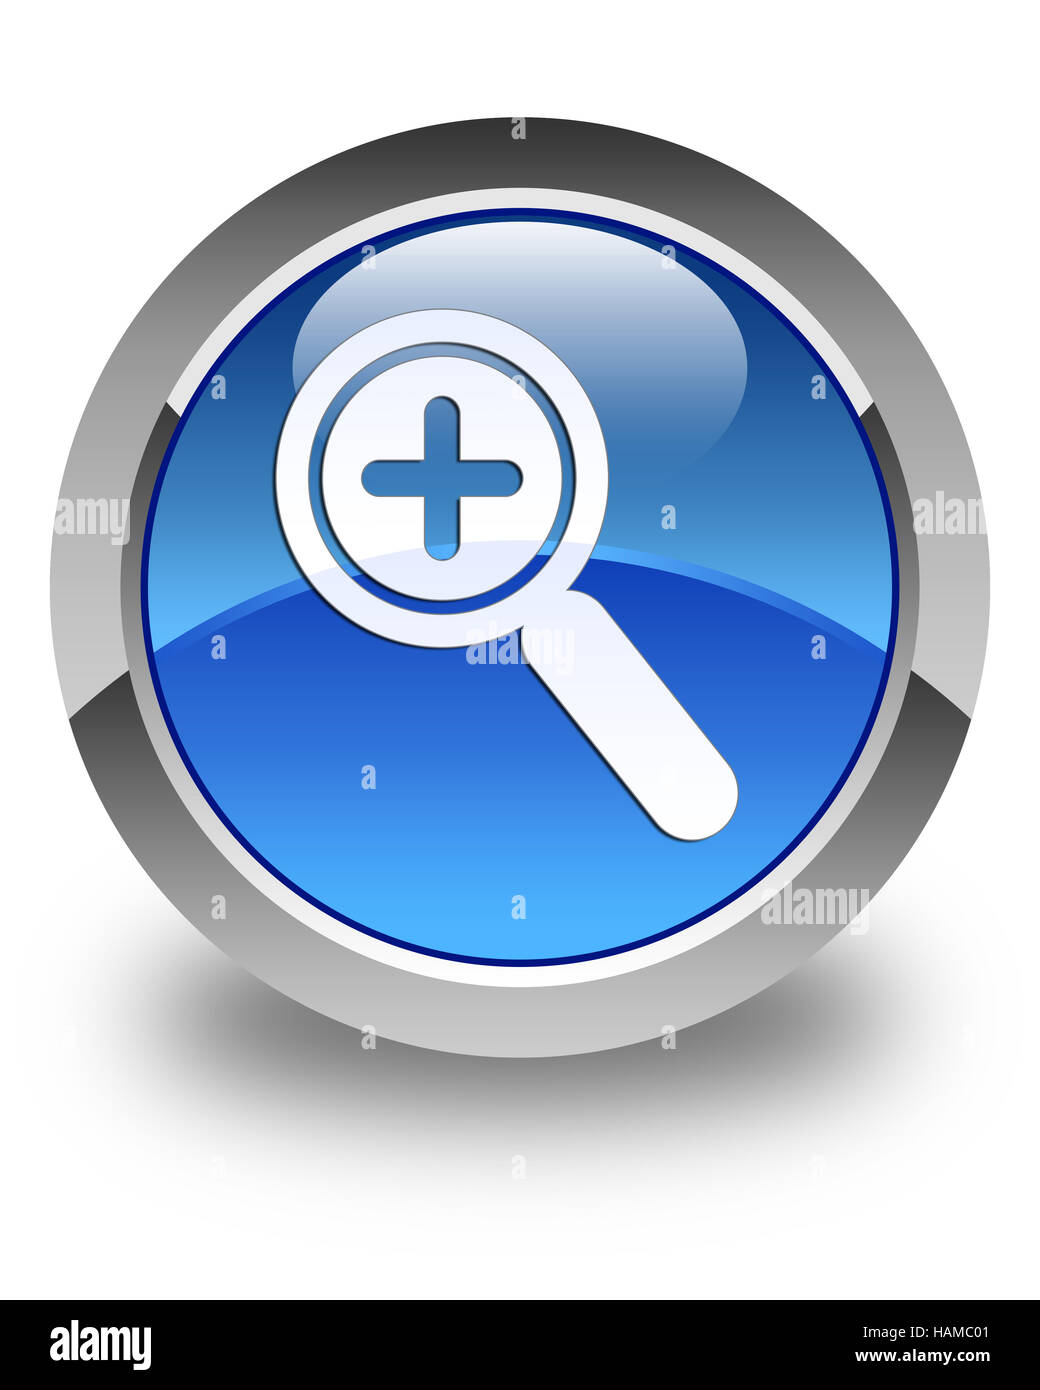 Zoom in icon isolated on glossy blue round button abstract illustration Stock Photo